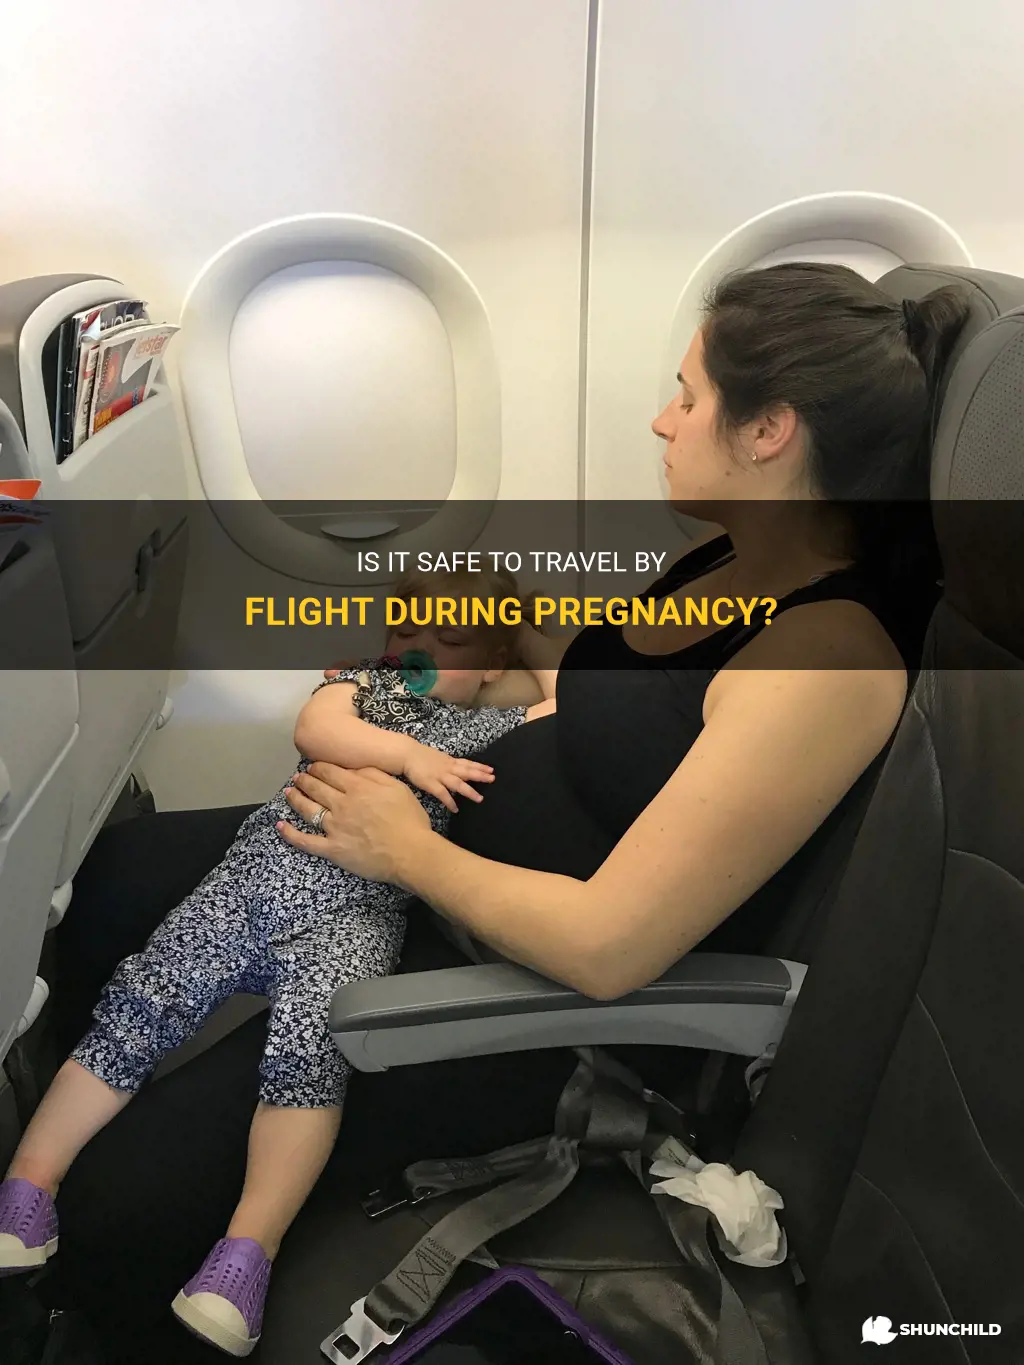 can we do flight journey during pregnancy